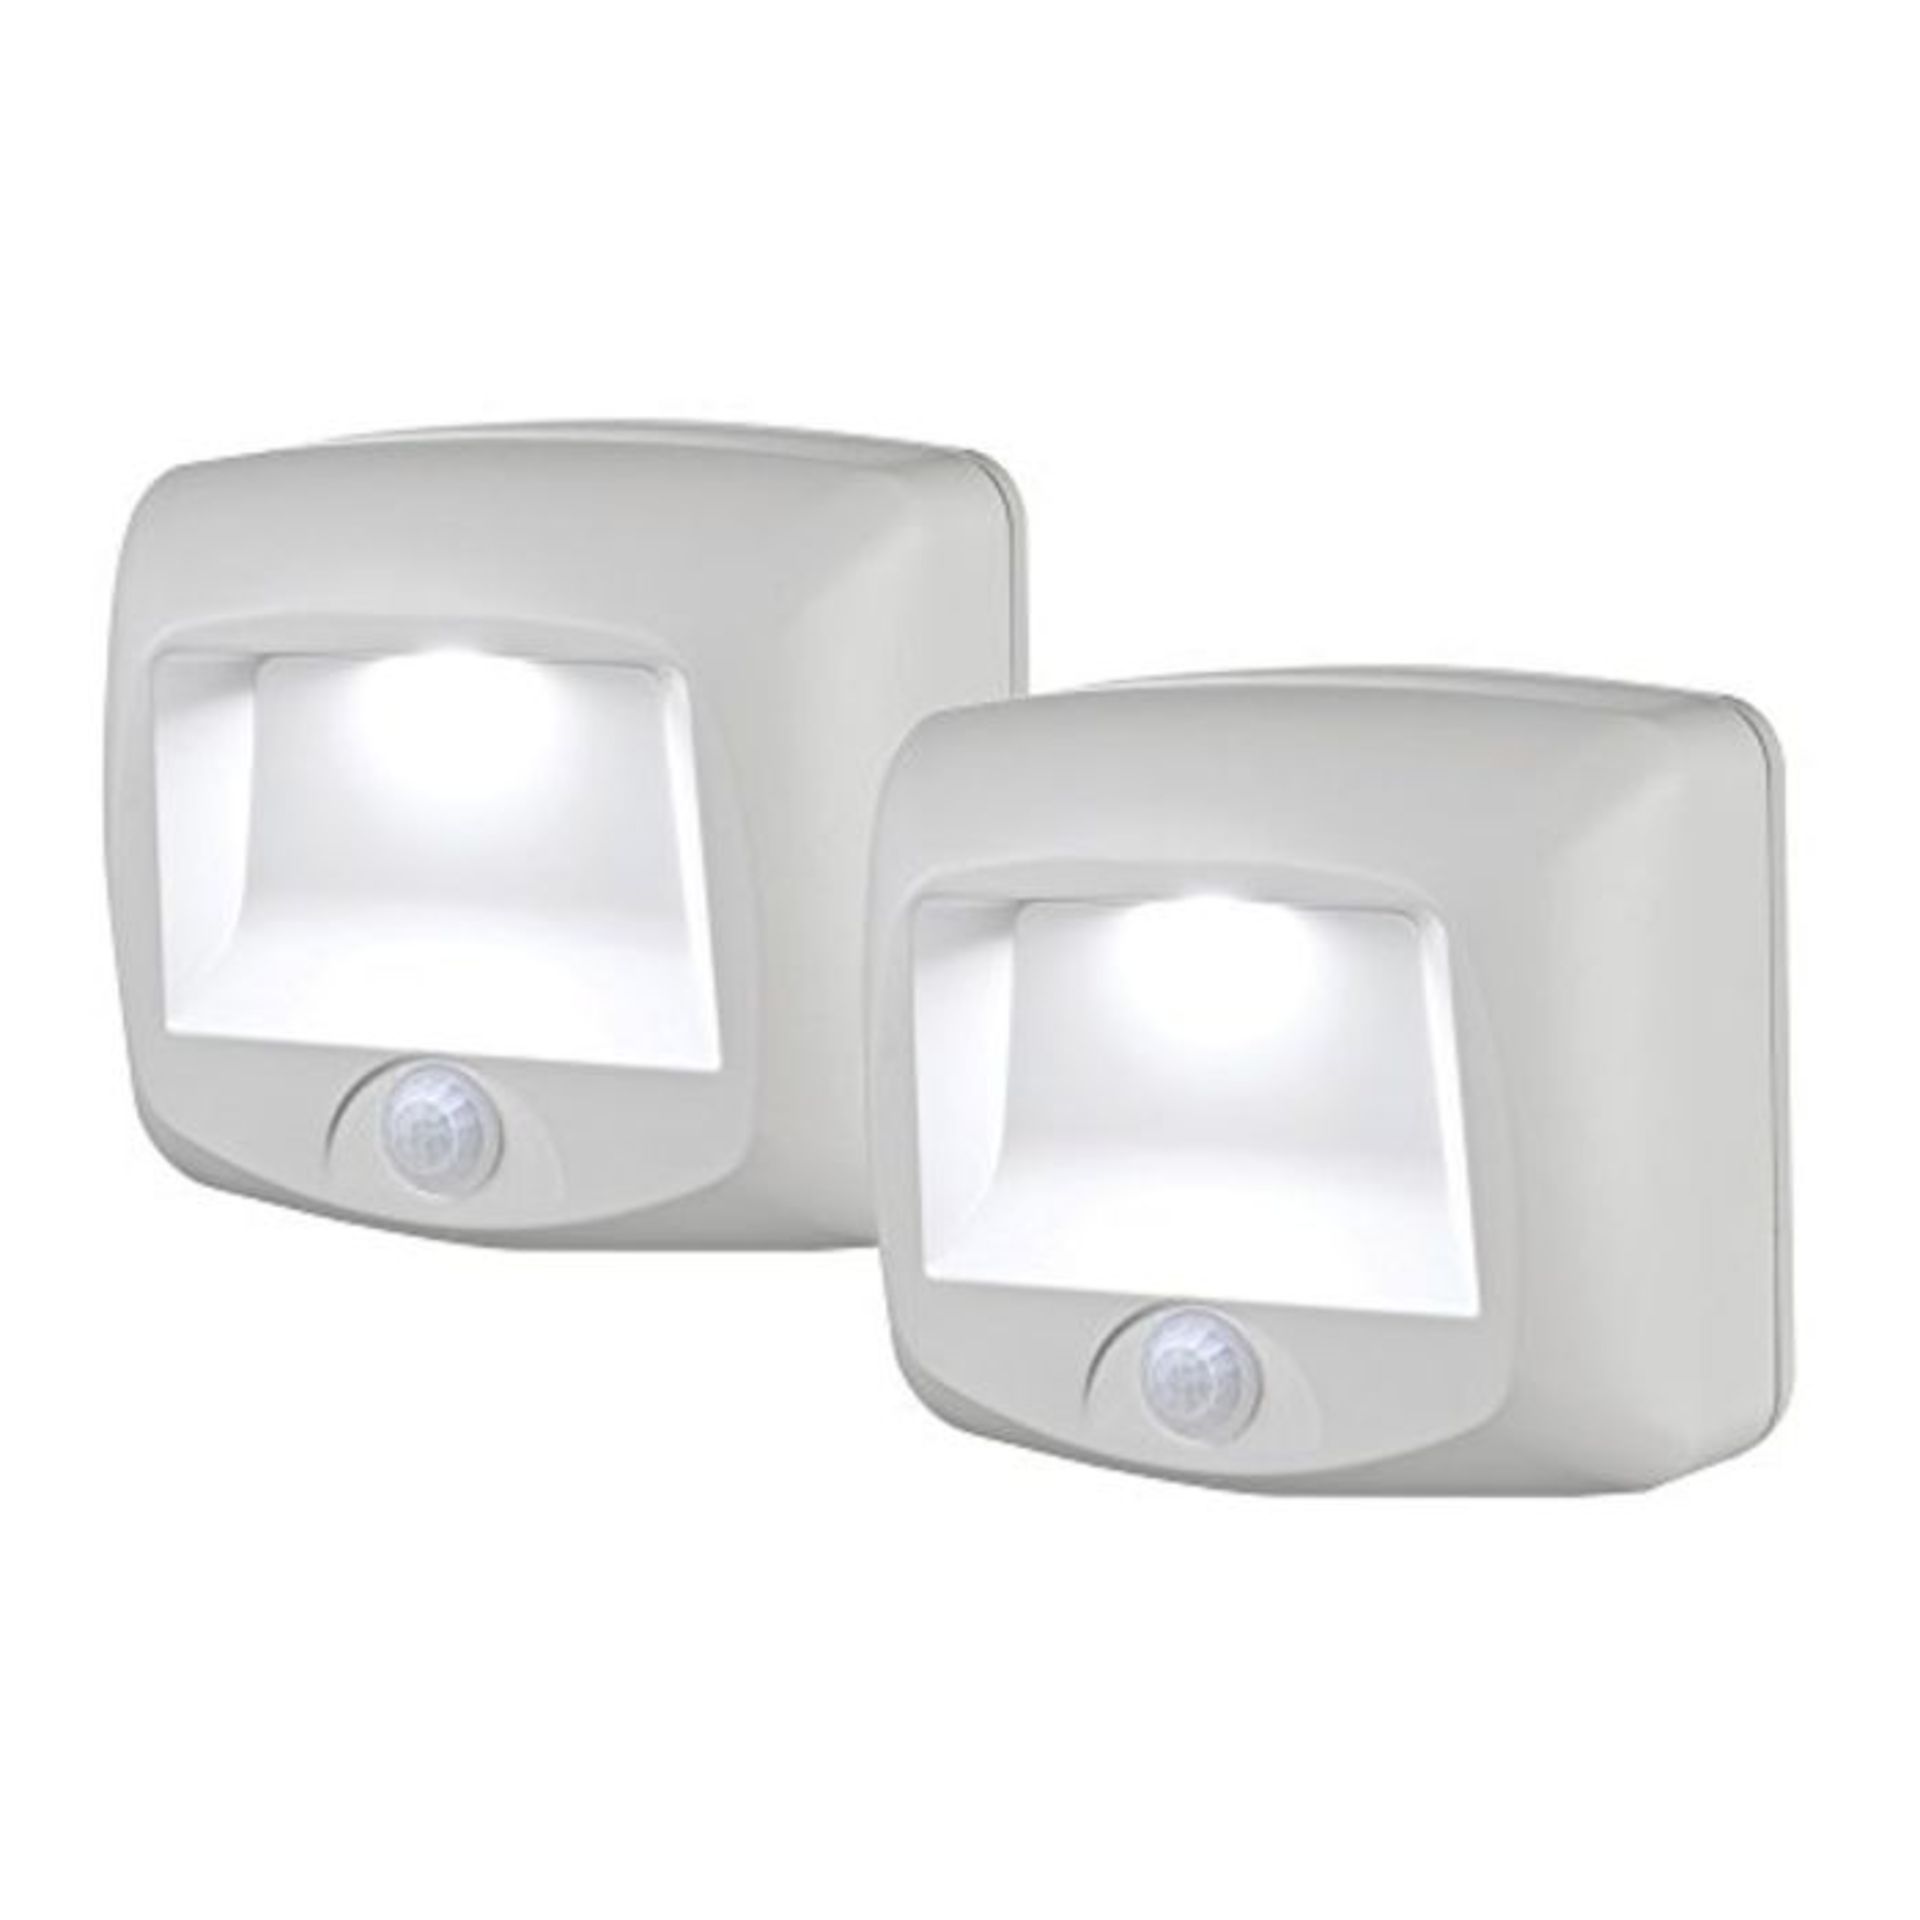 Mr Beams MB532 Wireless Battery Operated Indoor/Outdoor Motion-Sensing LED Step Light,